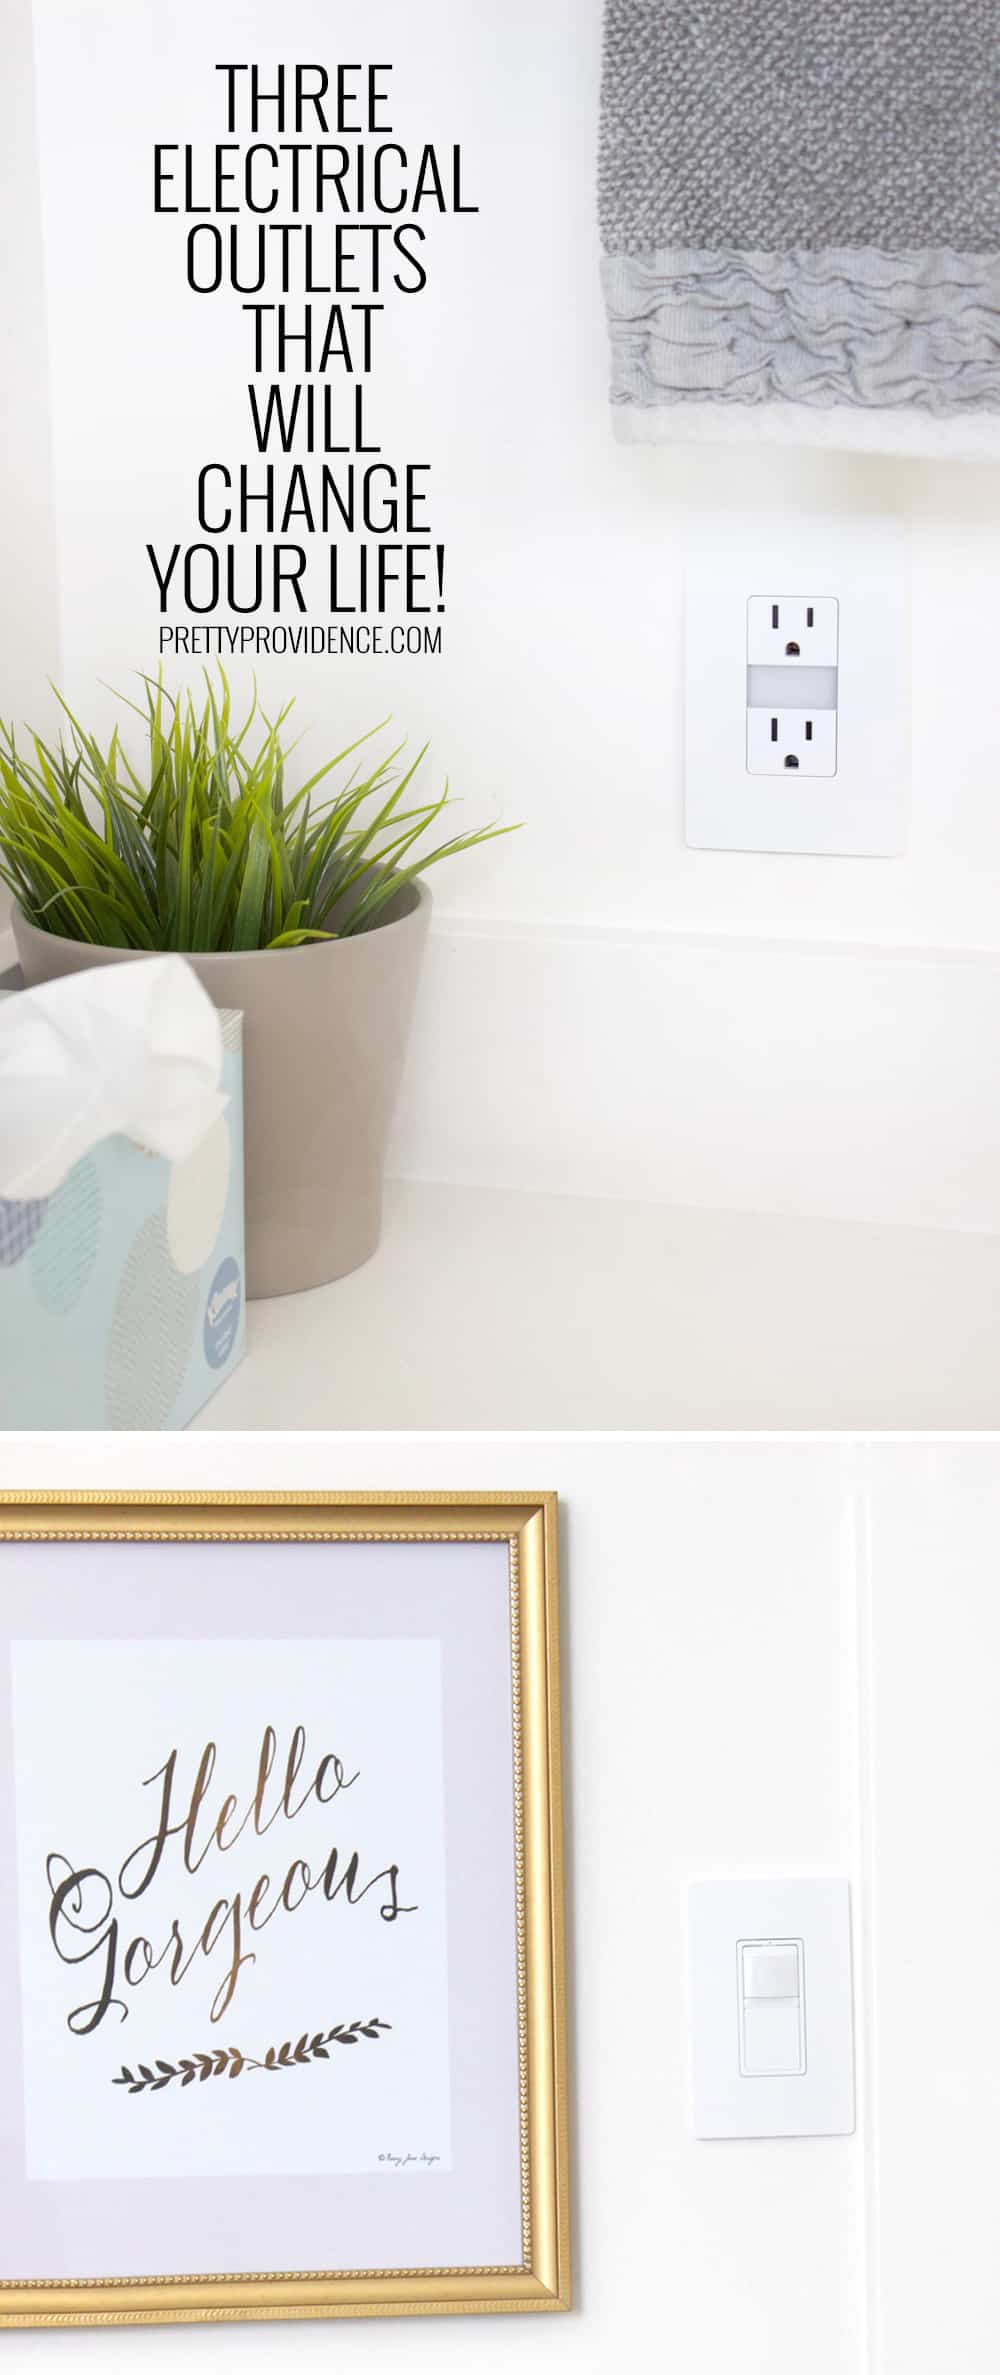 Three electrical outlets that will change your life! These will save you money, time, and they look beautiful to boot! Definite win/win. 